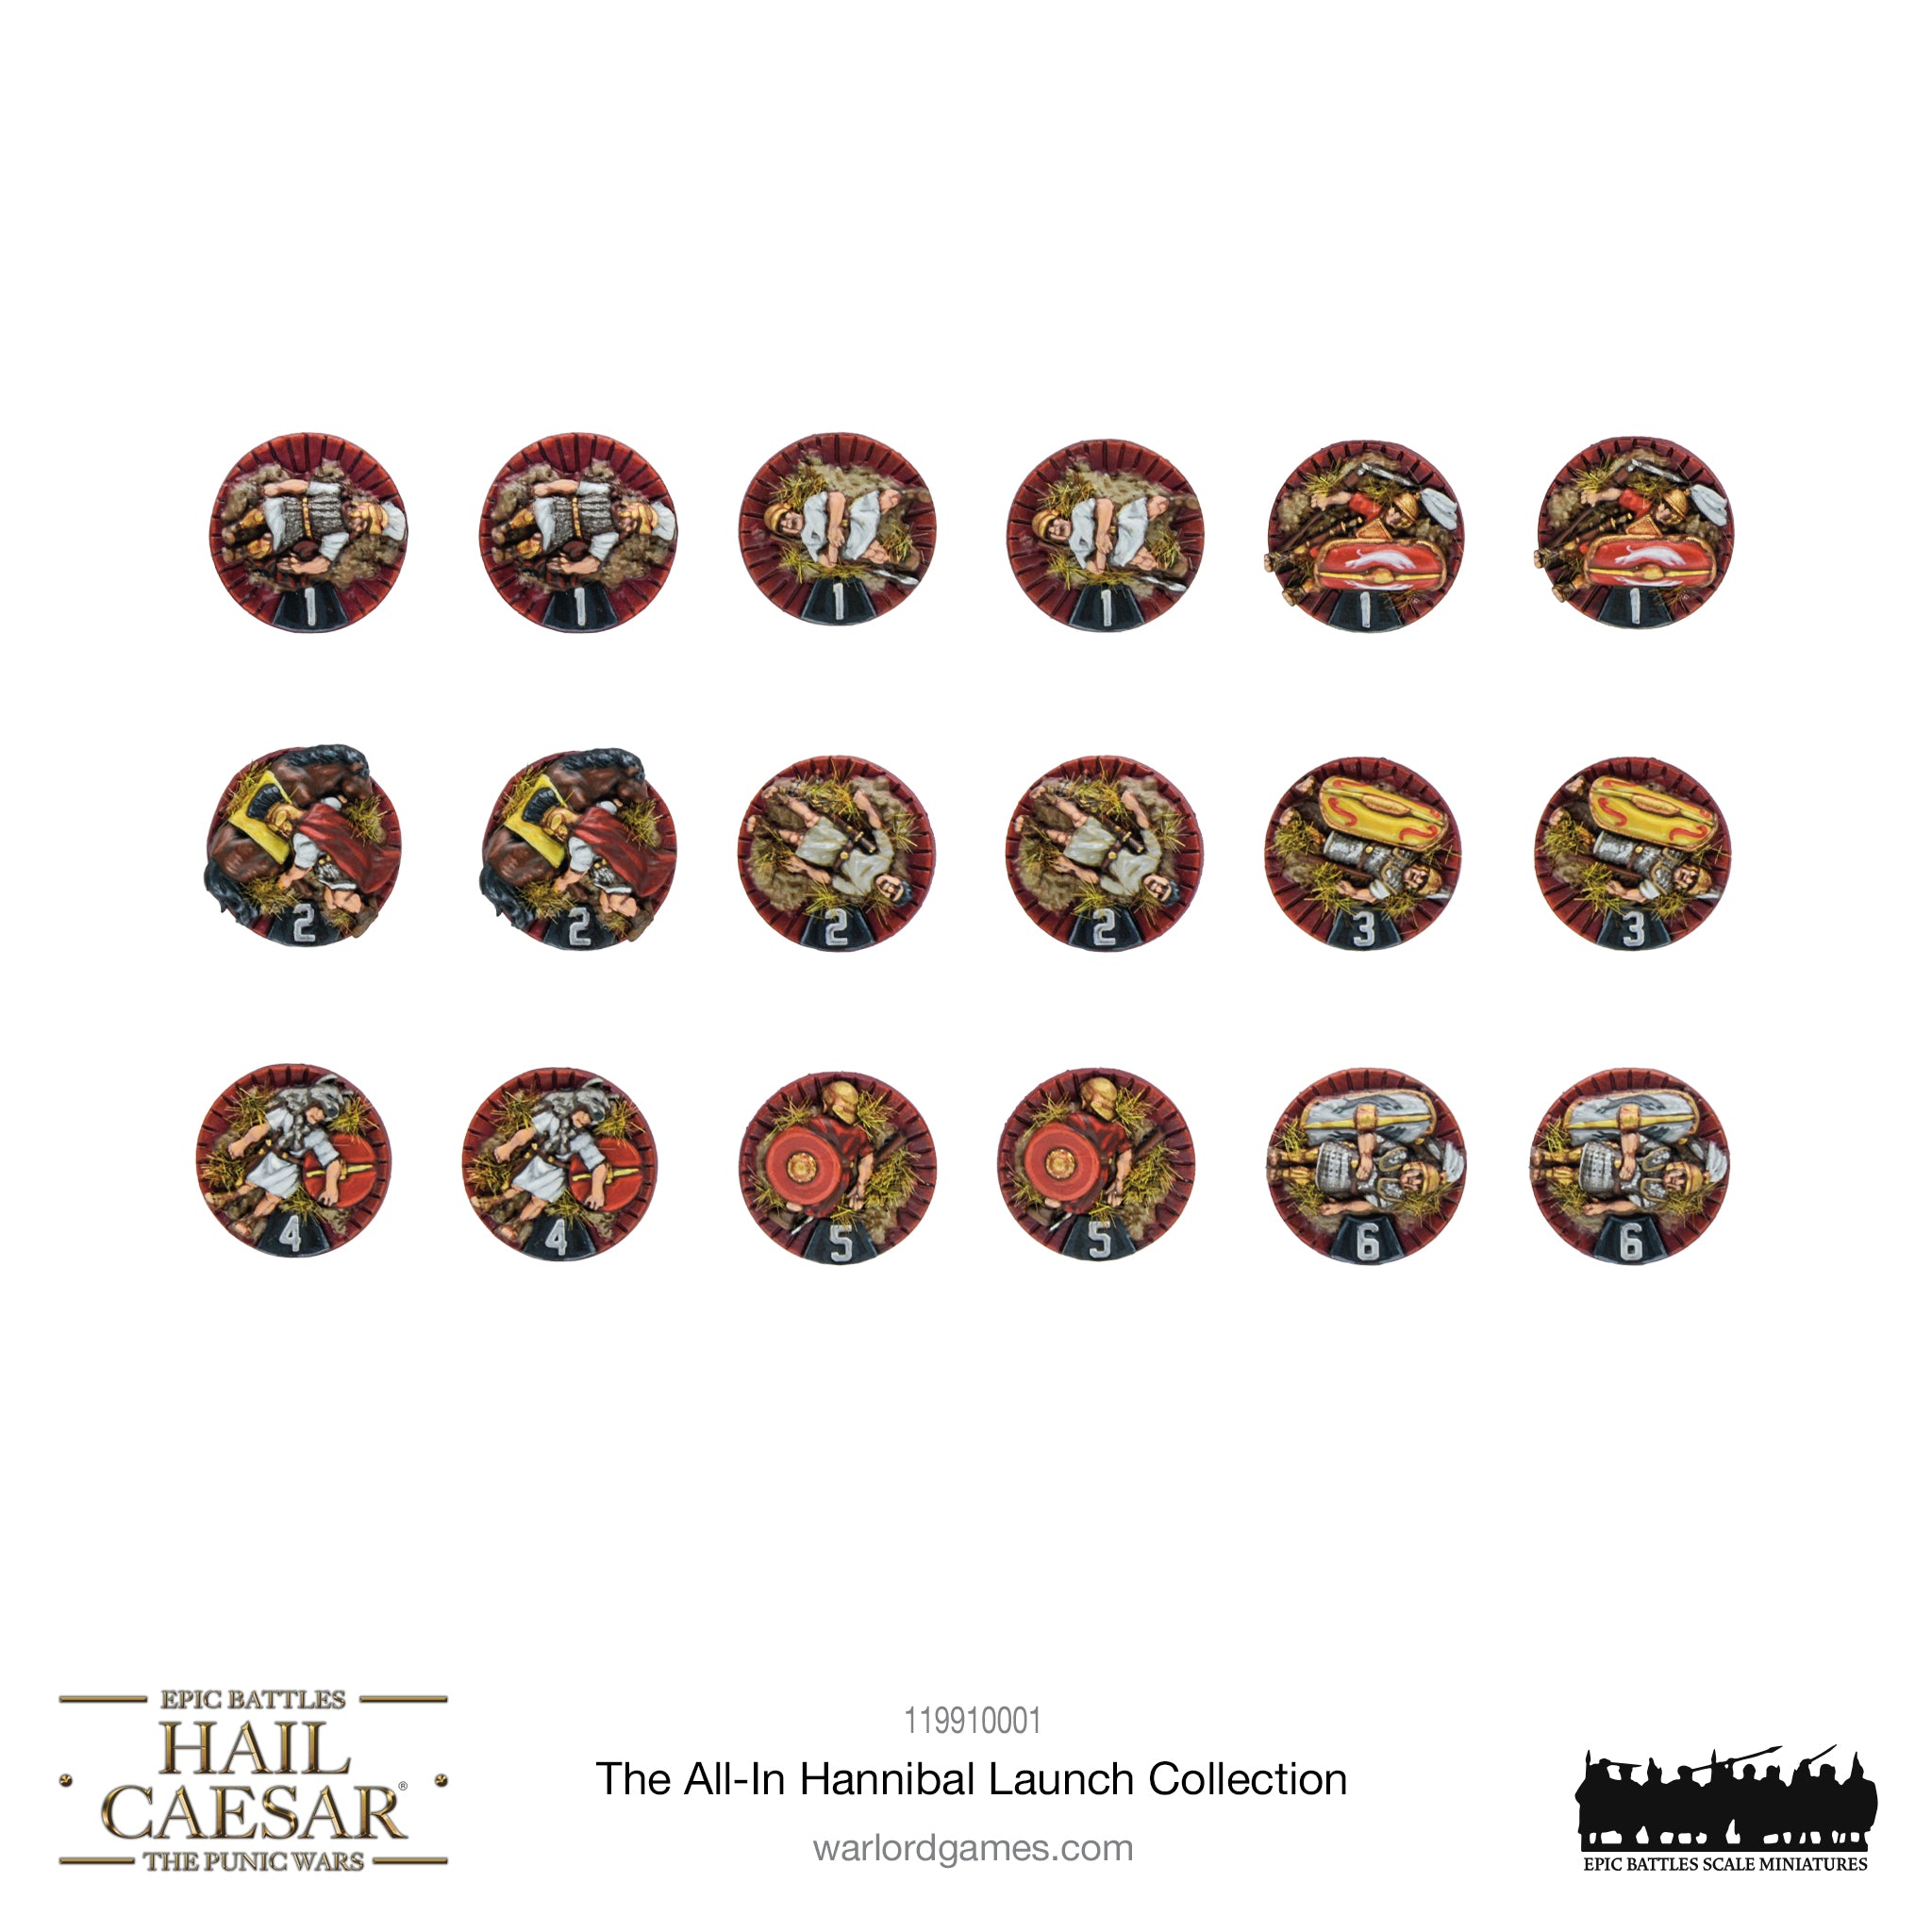 Hail Caesar Epic Battles – The All-In Hannibal Launch Collection